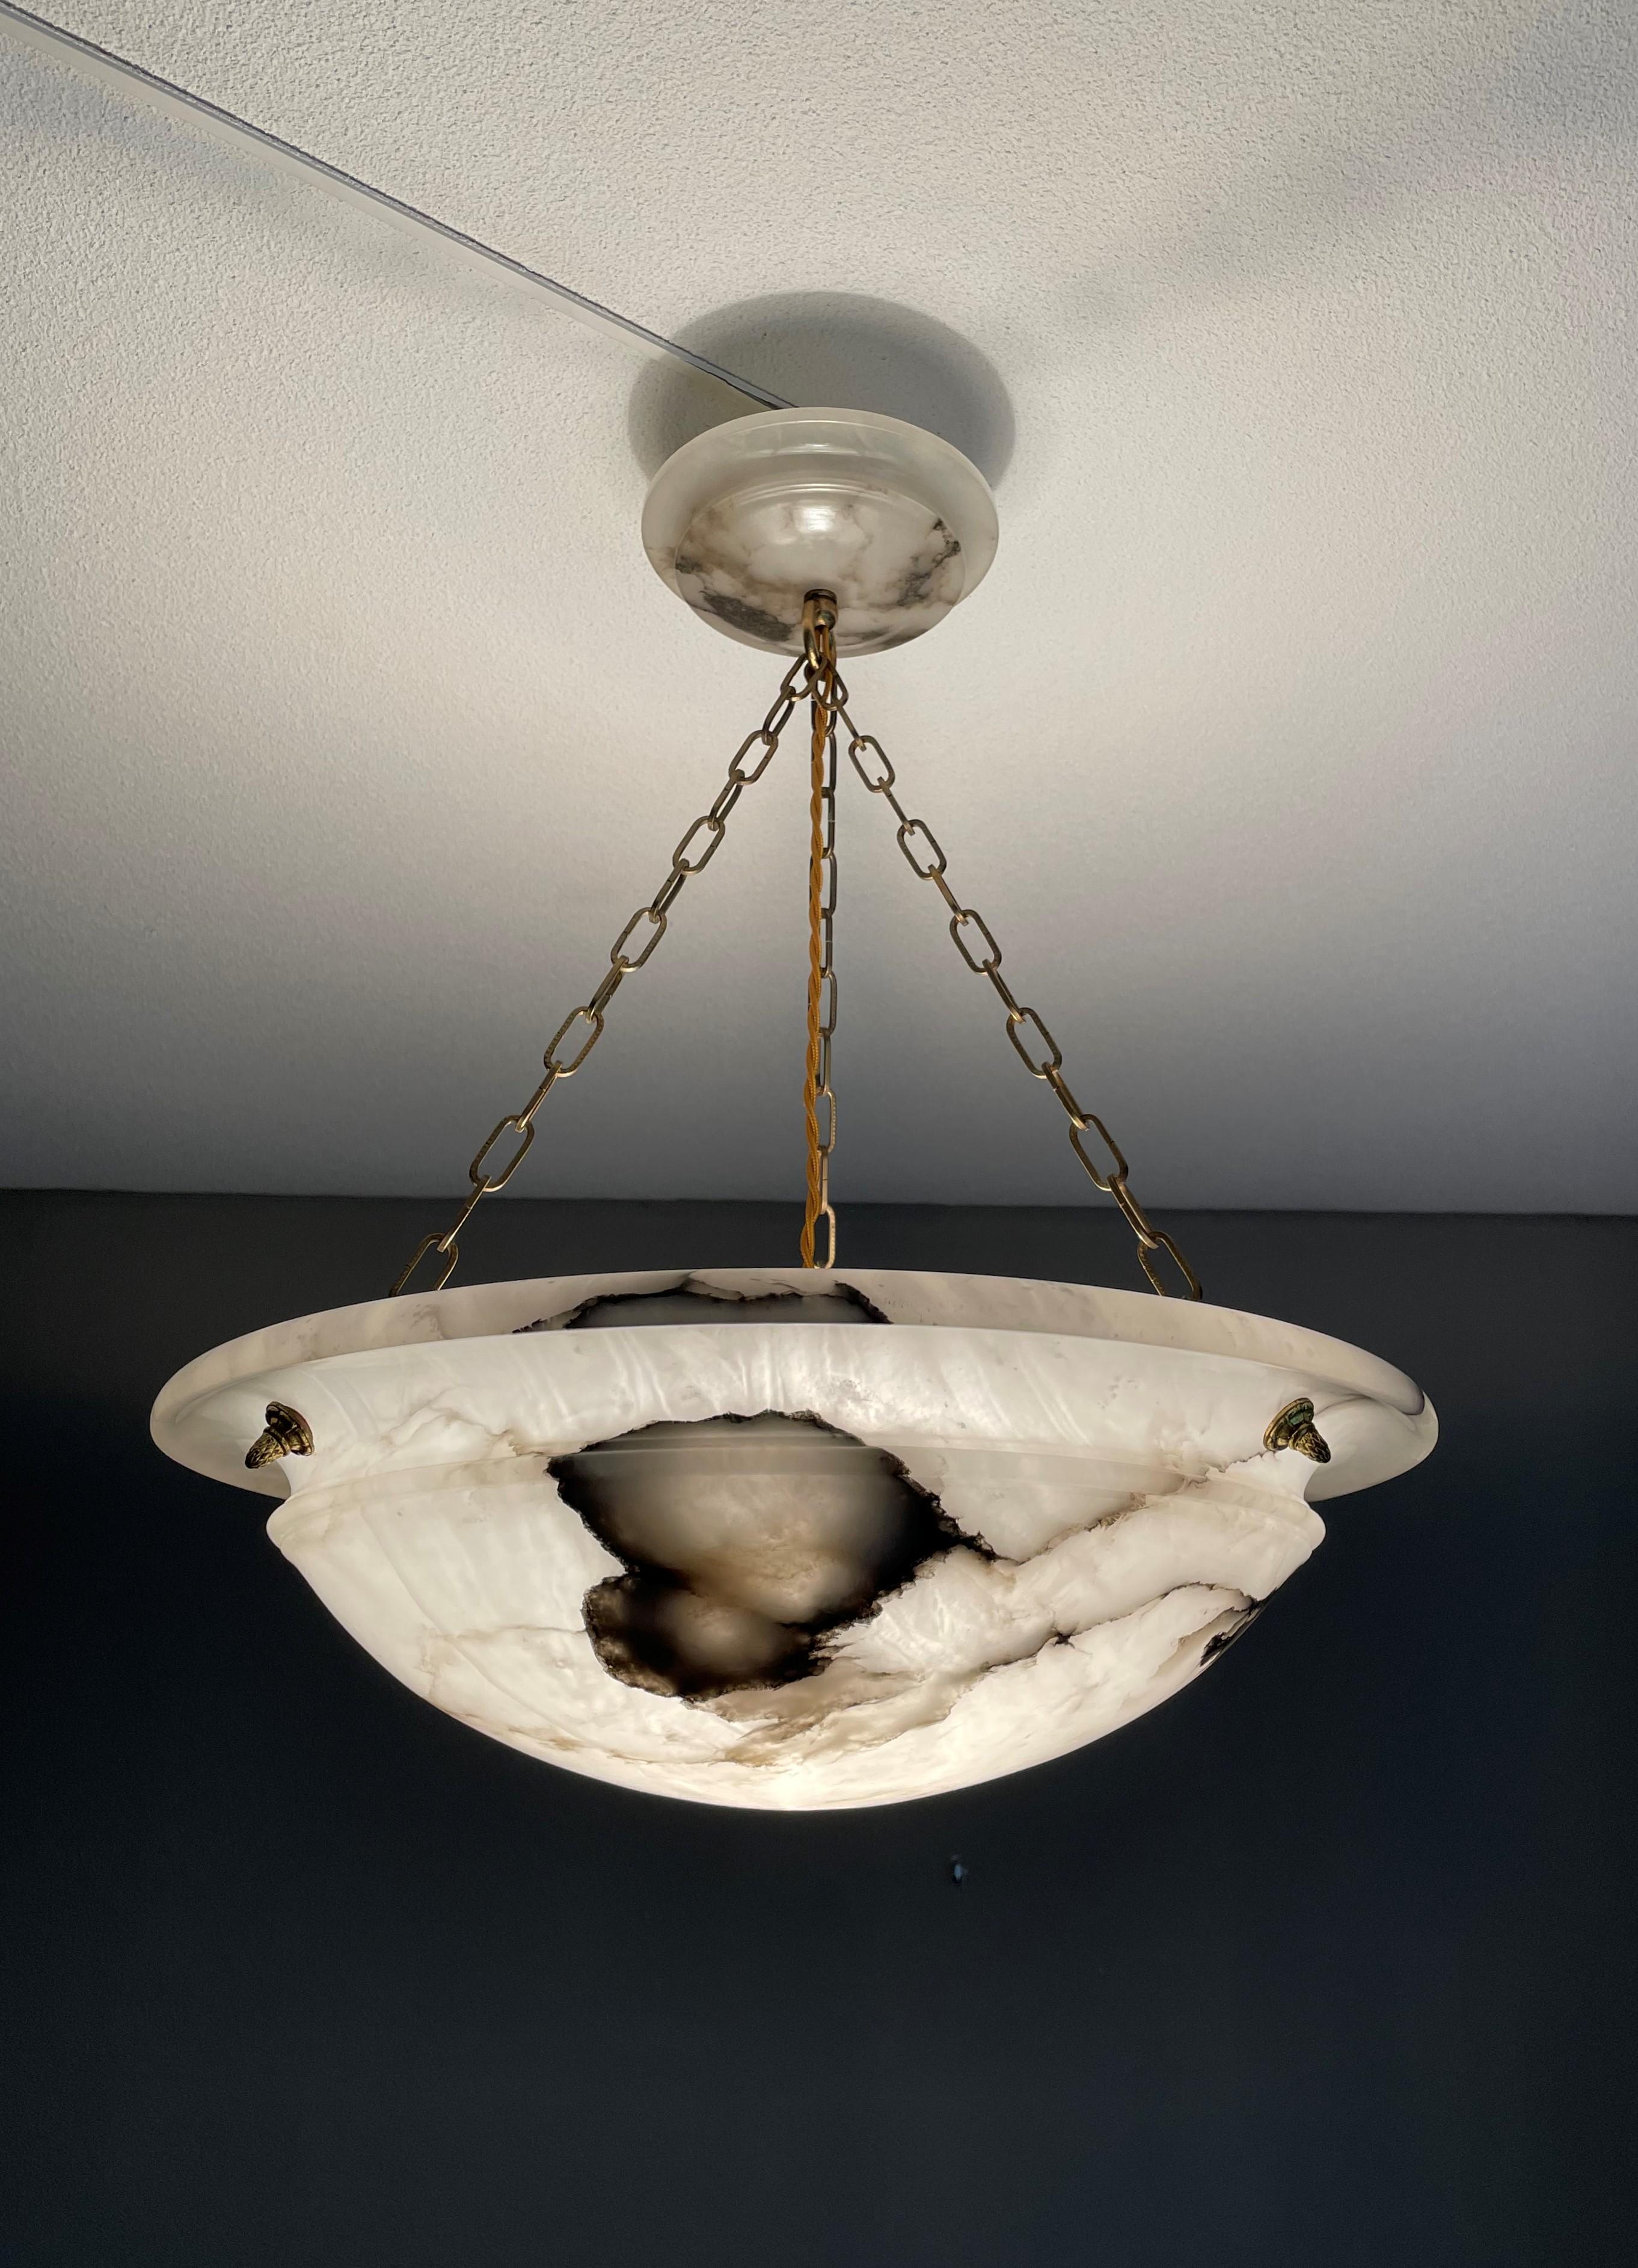 French Art Deco elegance for interior designers who wish to impress their clients.

If you are looking for a large size, beautiful, timeless, impressive and ready to use alabaster chandelier then this striking French light from circa 1920 could be